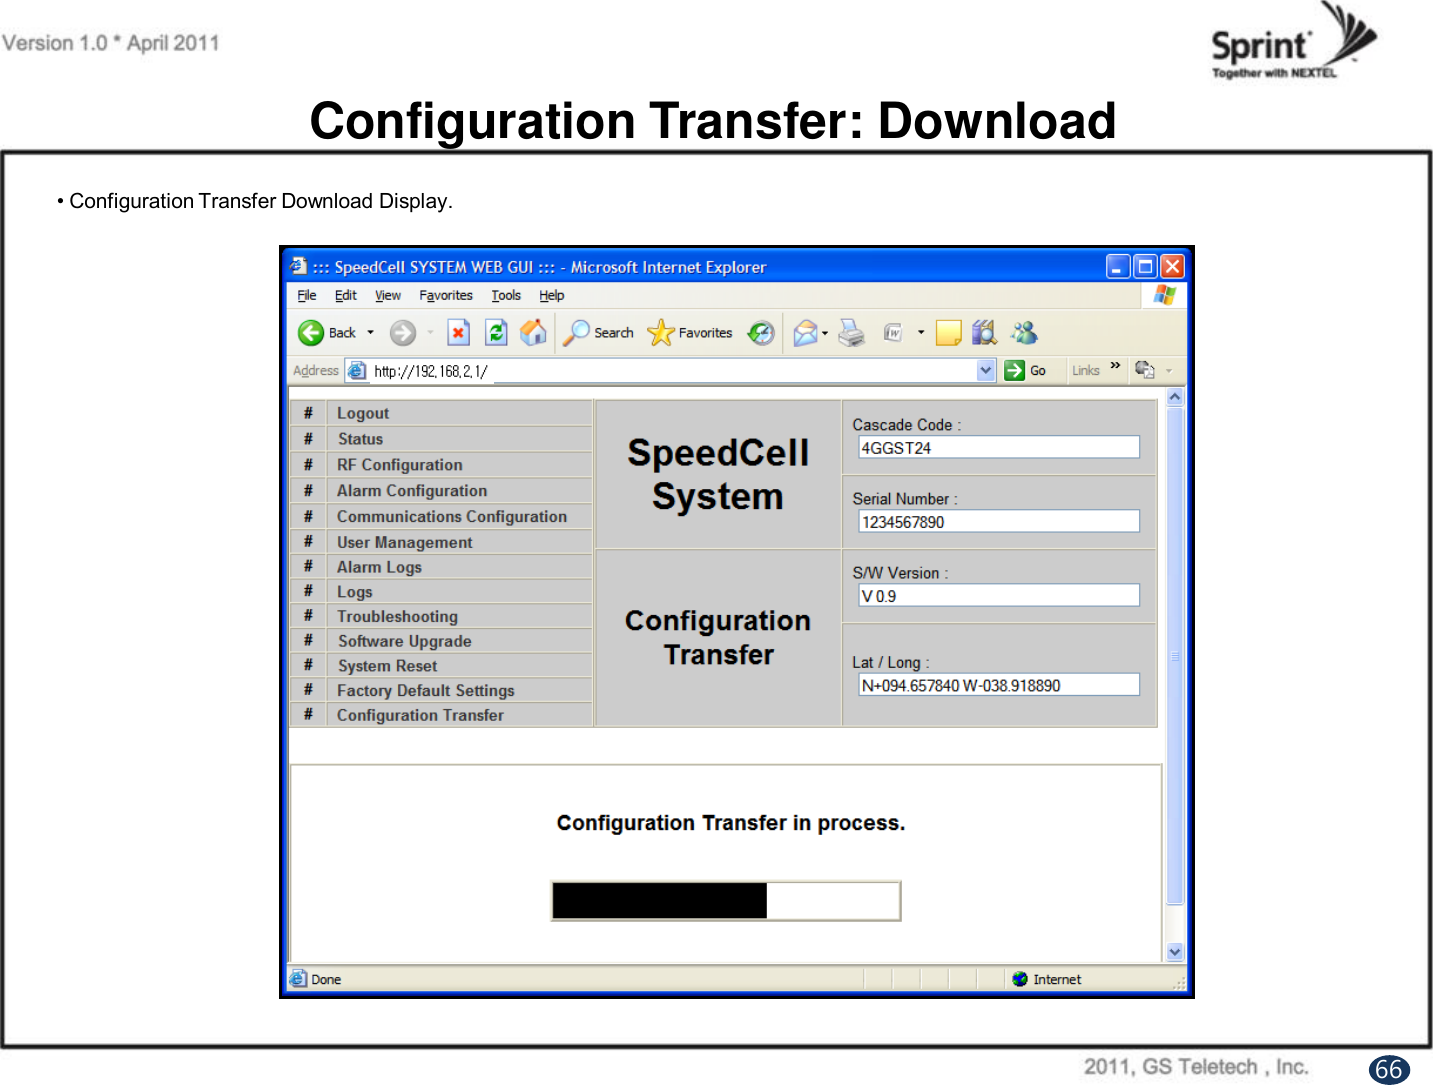 Configuration Transfer: Download• Configuration Transfer Download Display.66